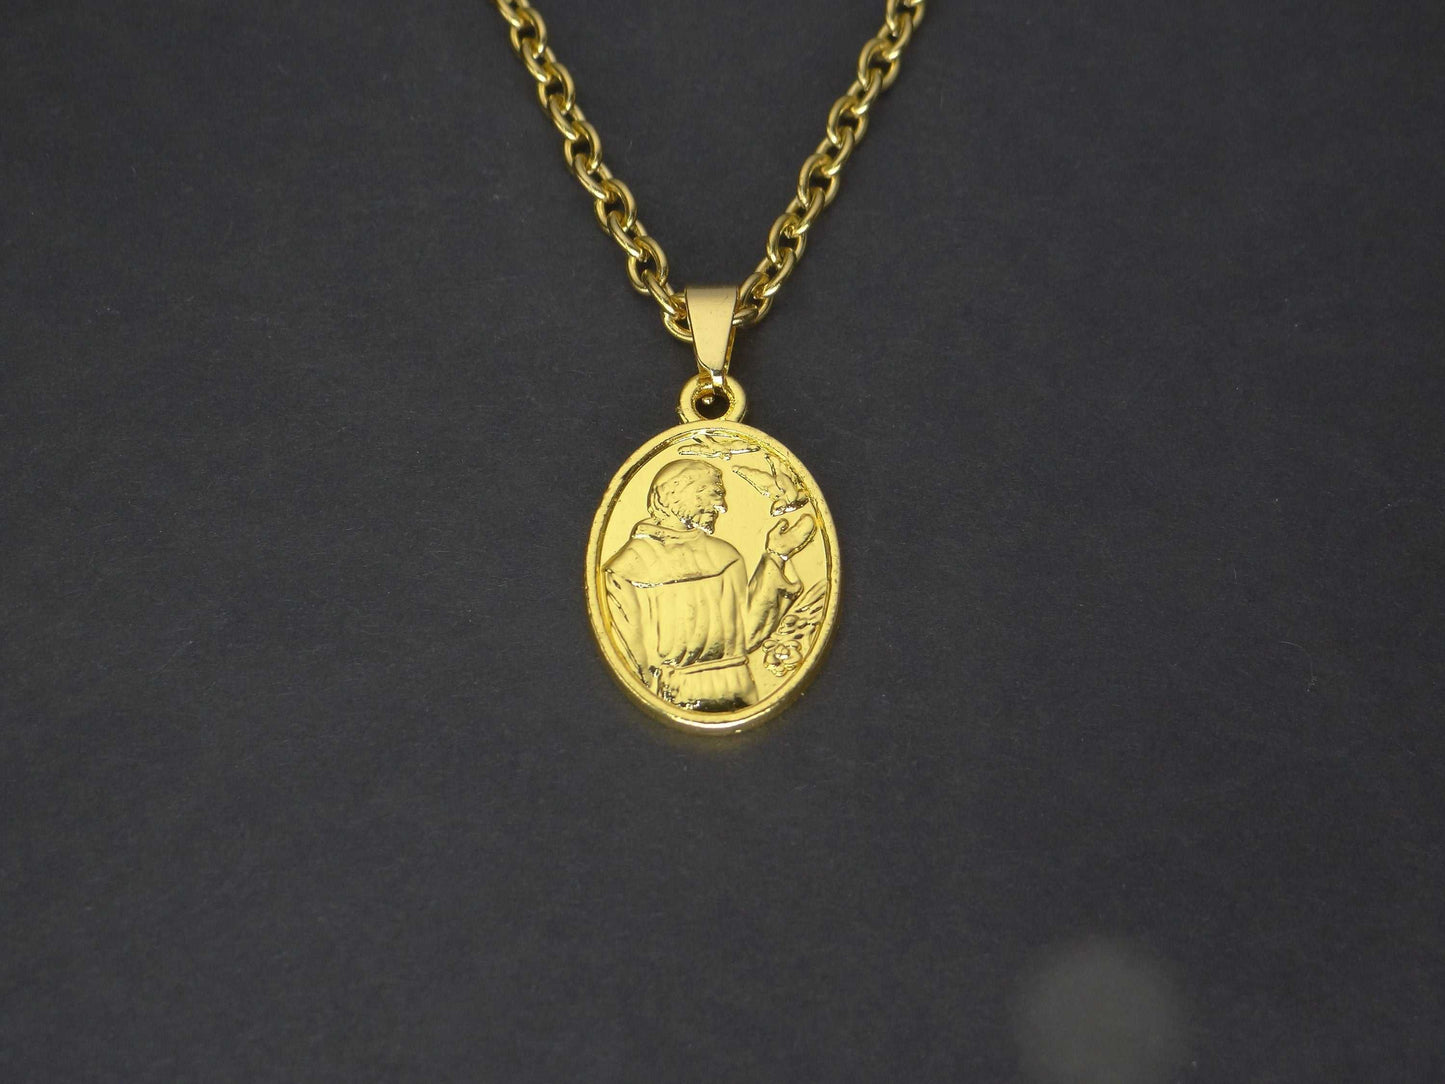 CRW Saint Francis of Assissi Necklace with 1.6mm rolo link chain in gold - St. Necklace for Women - Necklace for Men - Necklace with Pendant